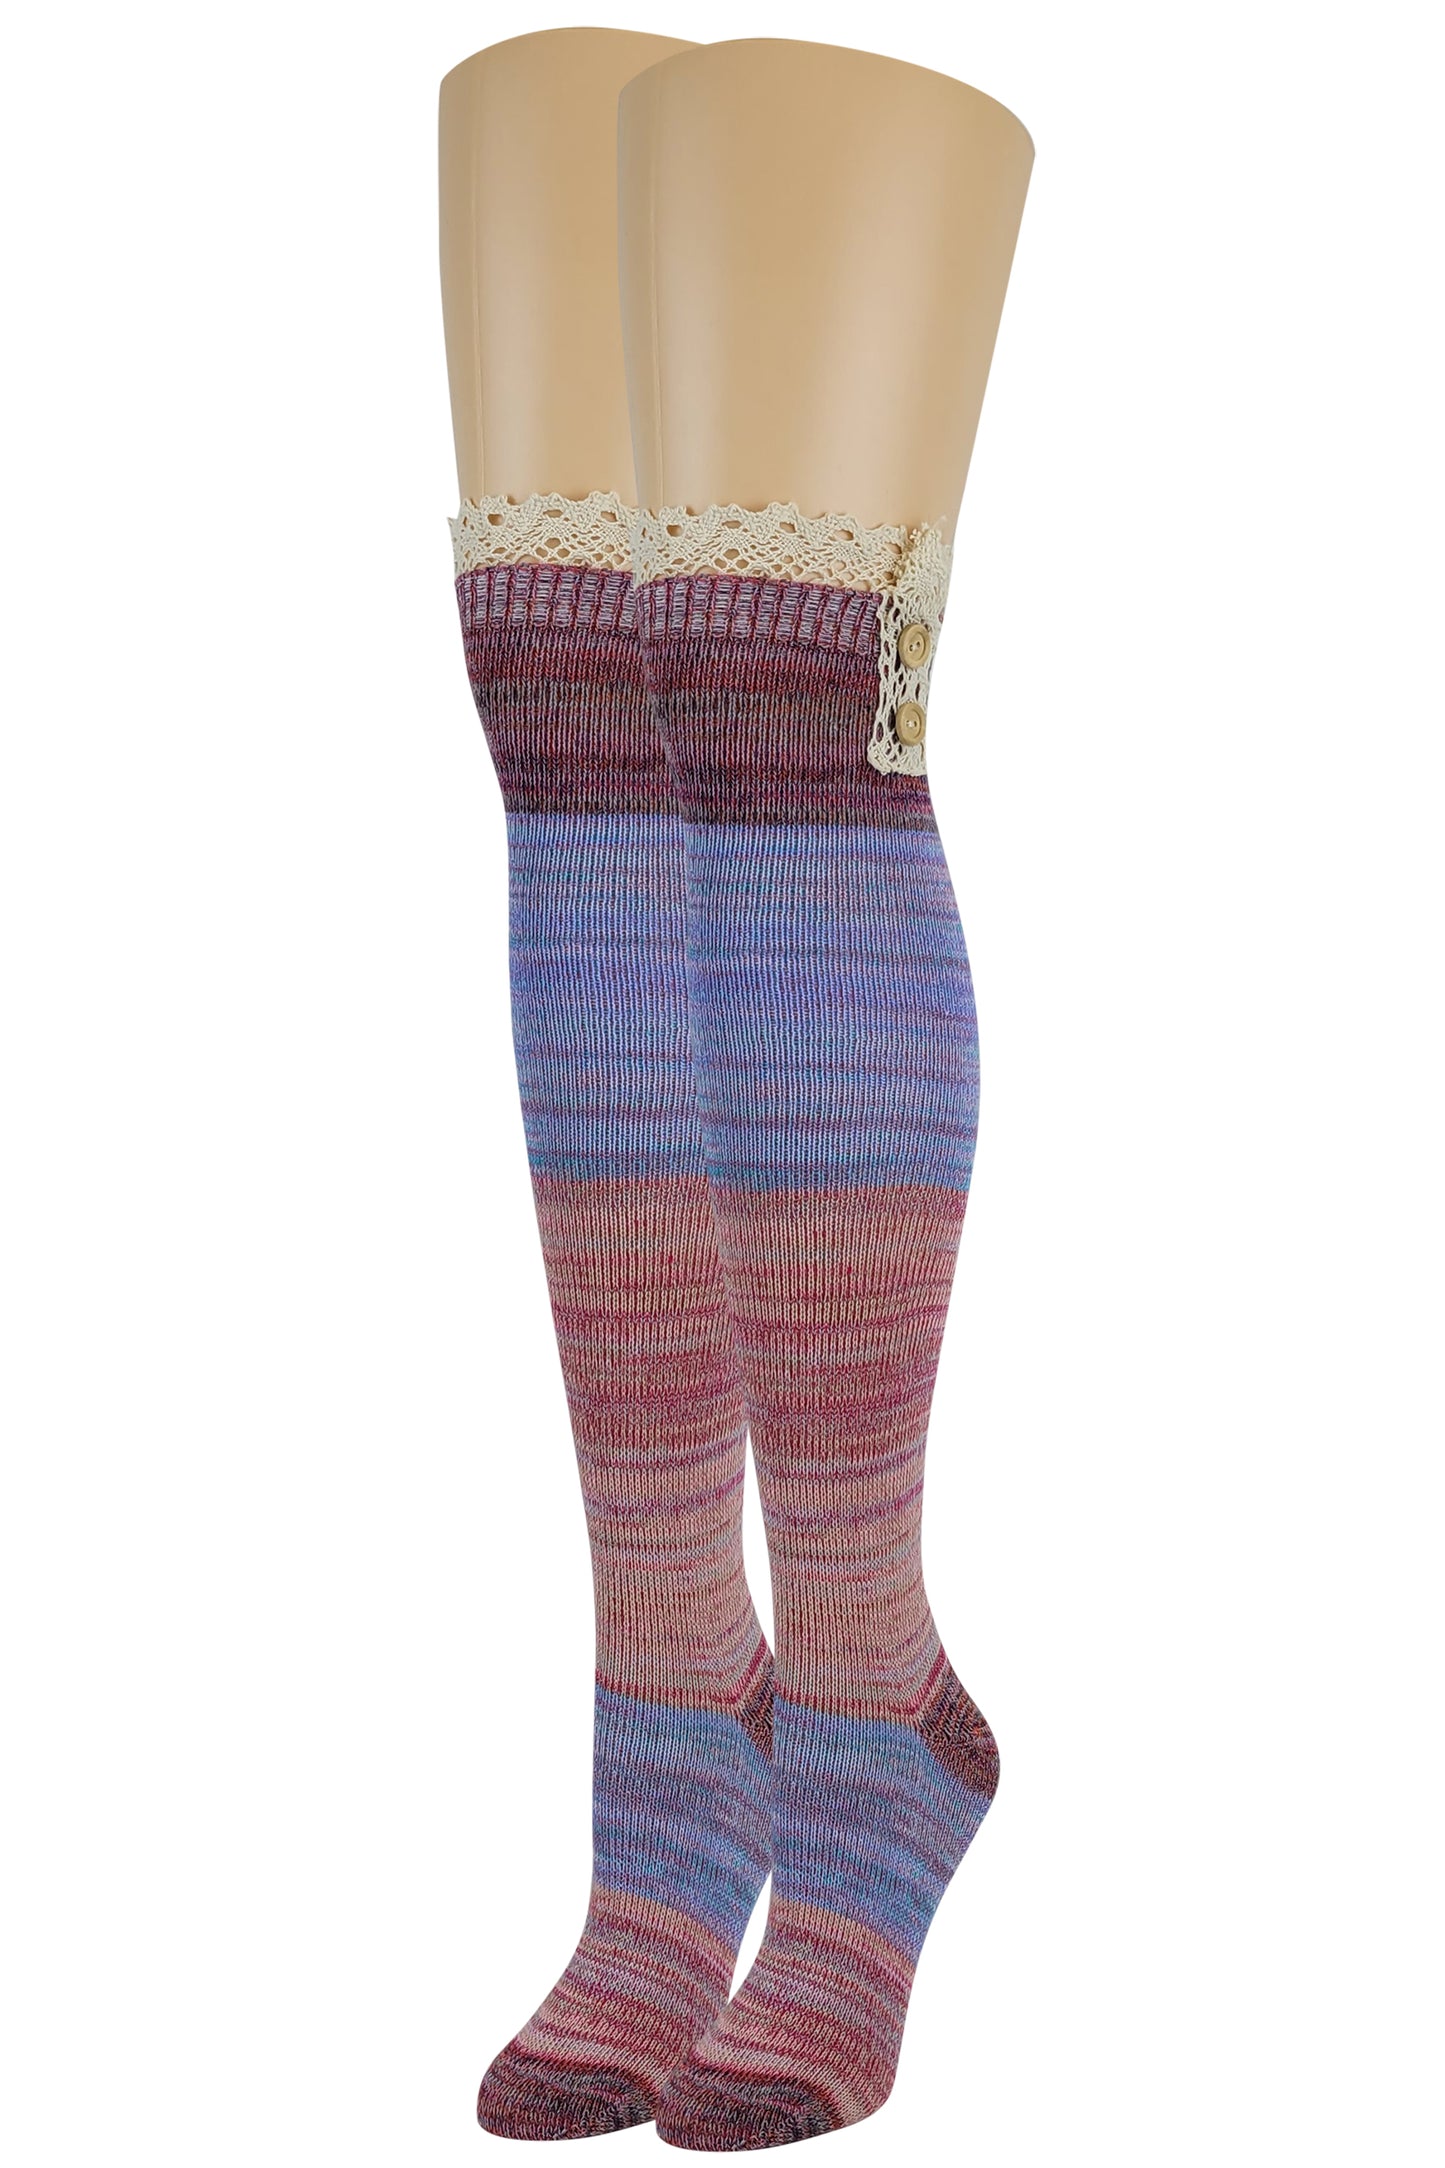 Over the Knee Socks | Assorted Color with Buttons and Lace (4 Pairs)